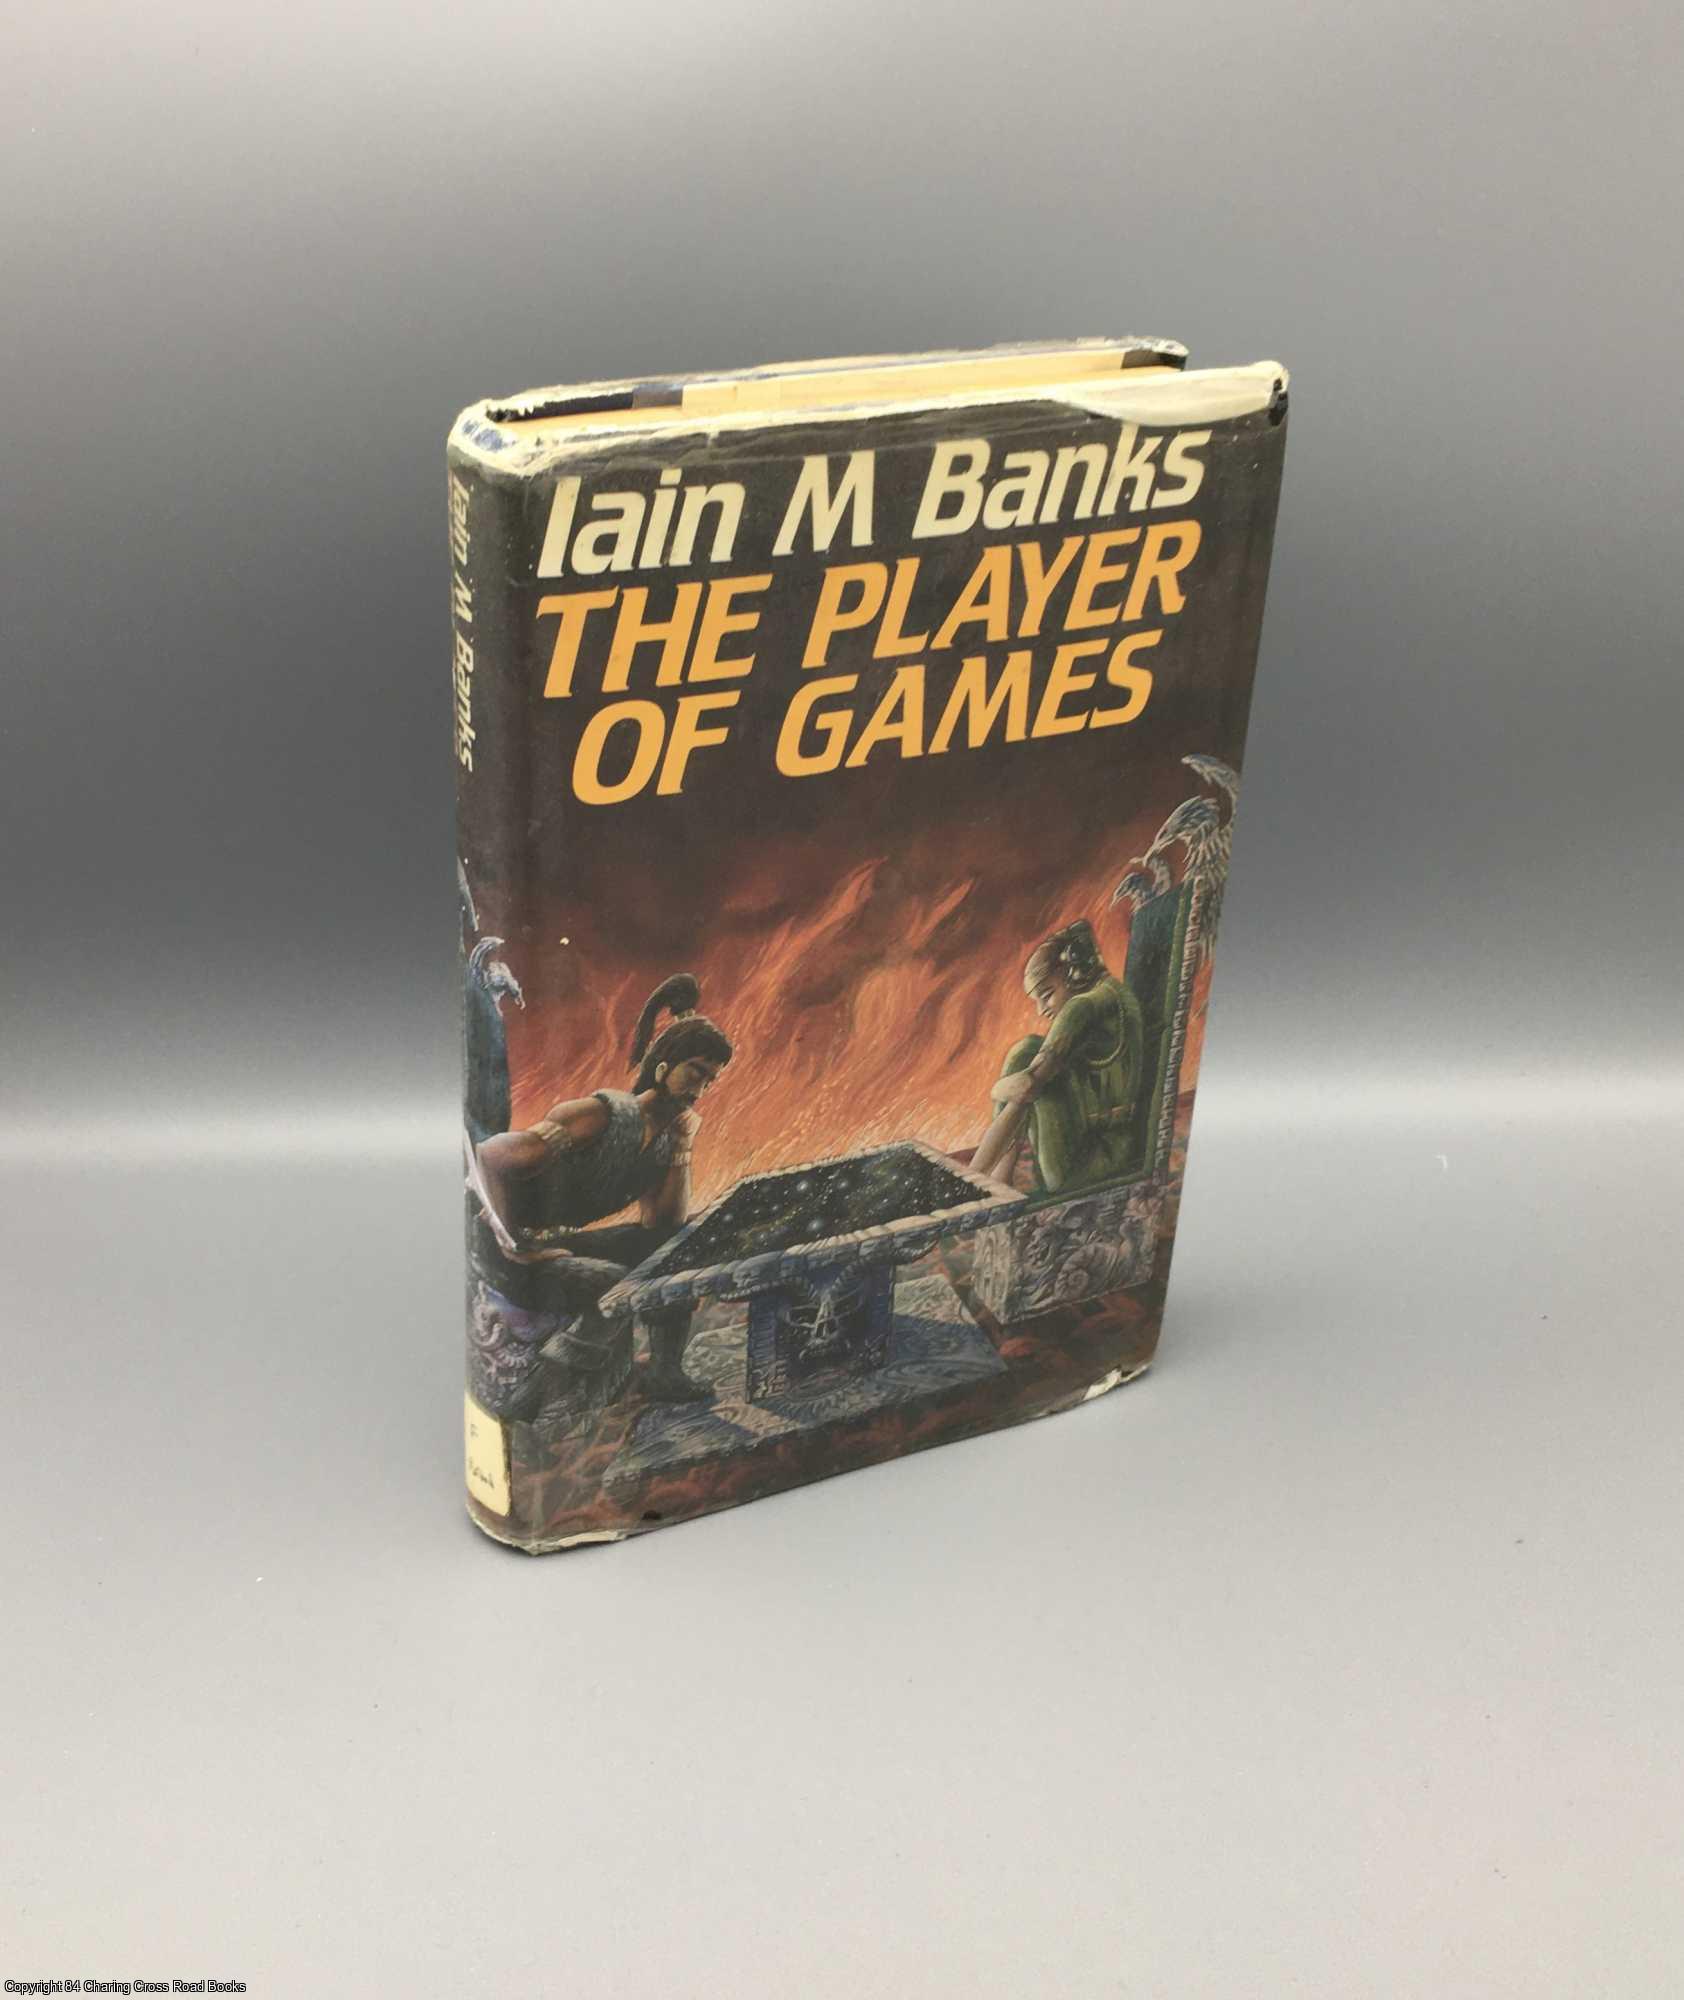 Banks, Iain M. - The Player of Games